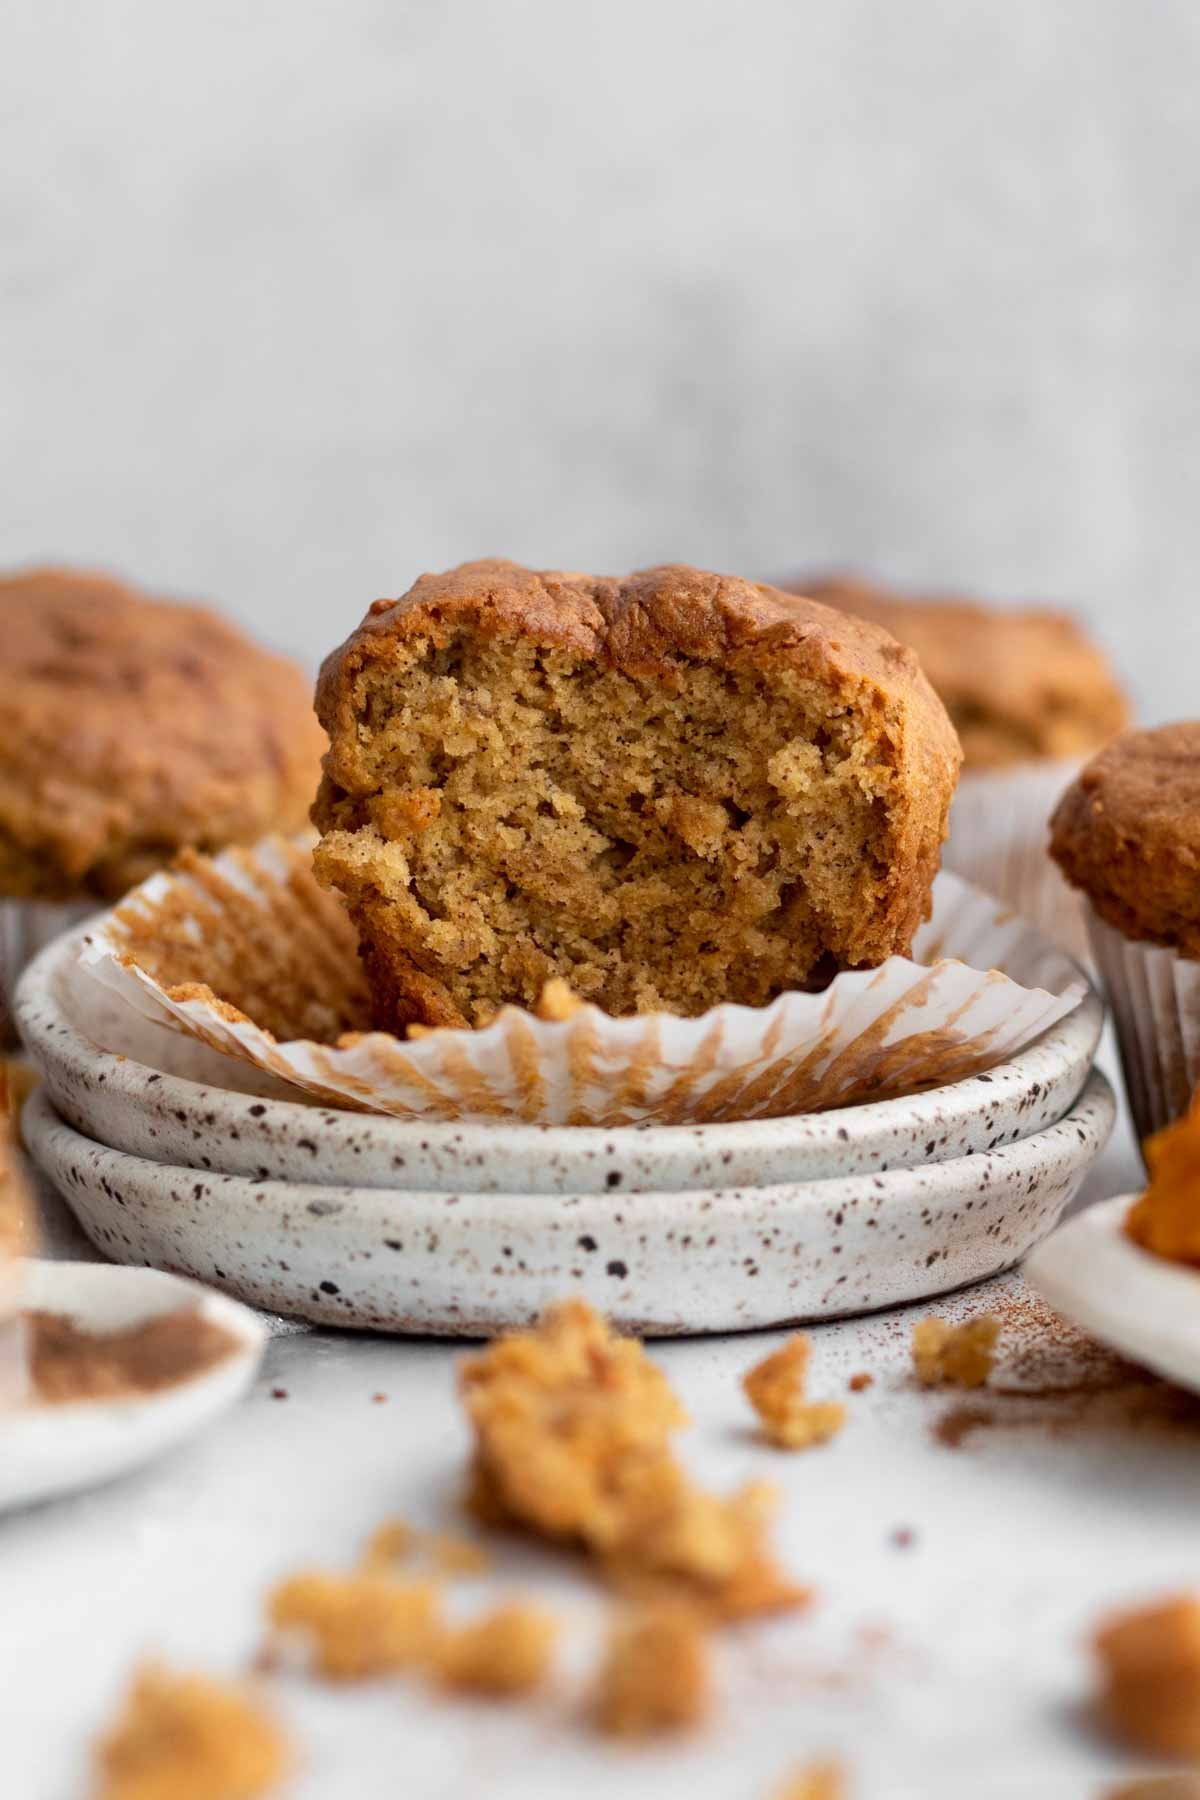 A delicious muffin stands proudly on a plate with a bite taken out.